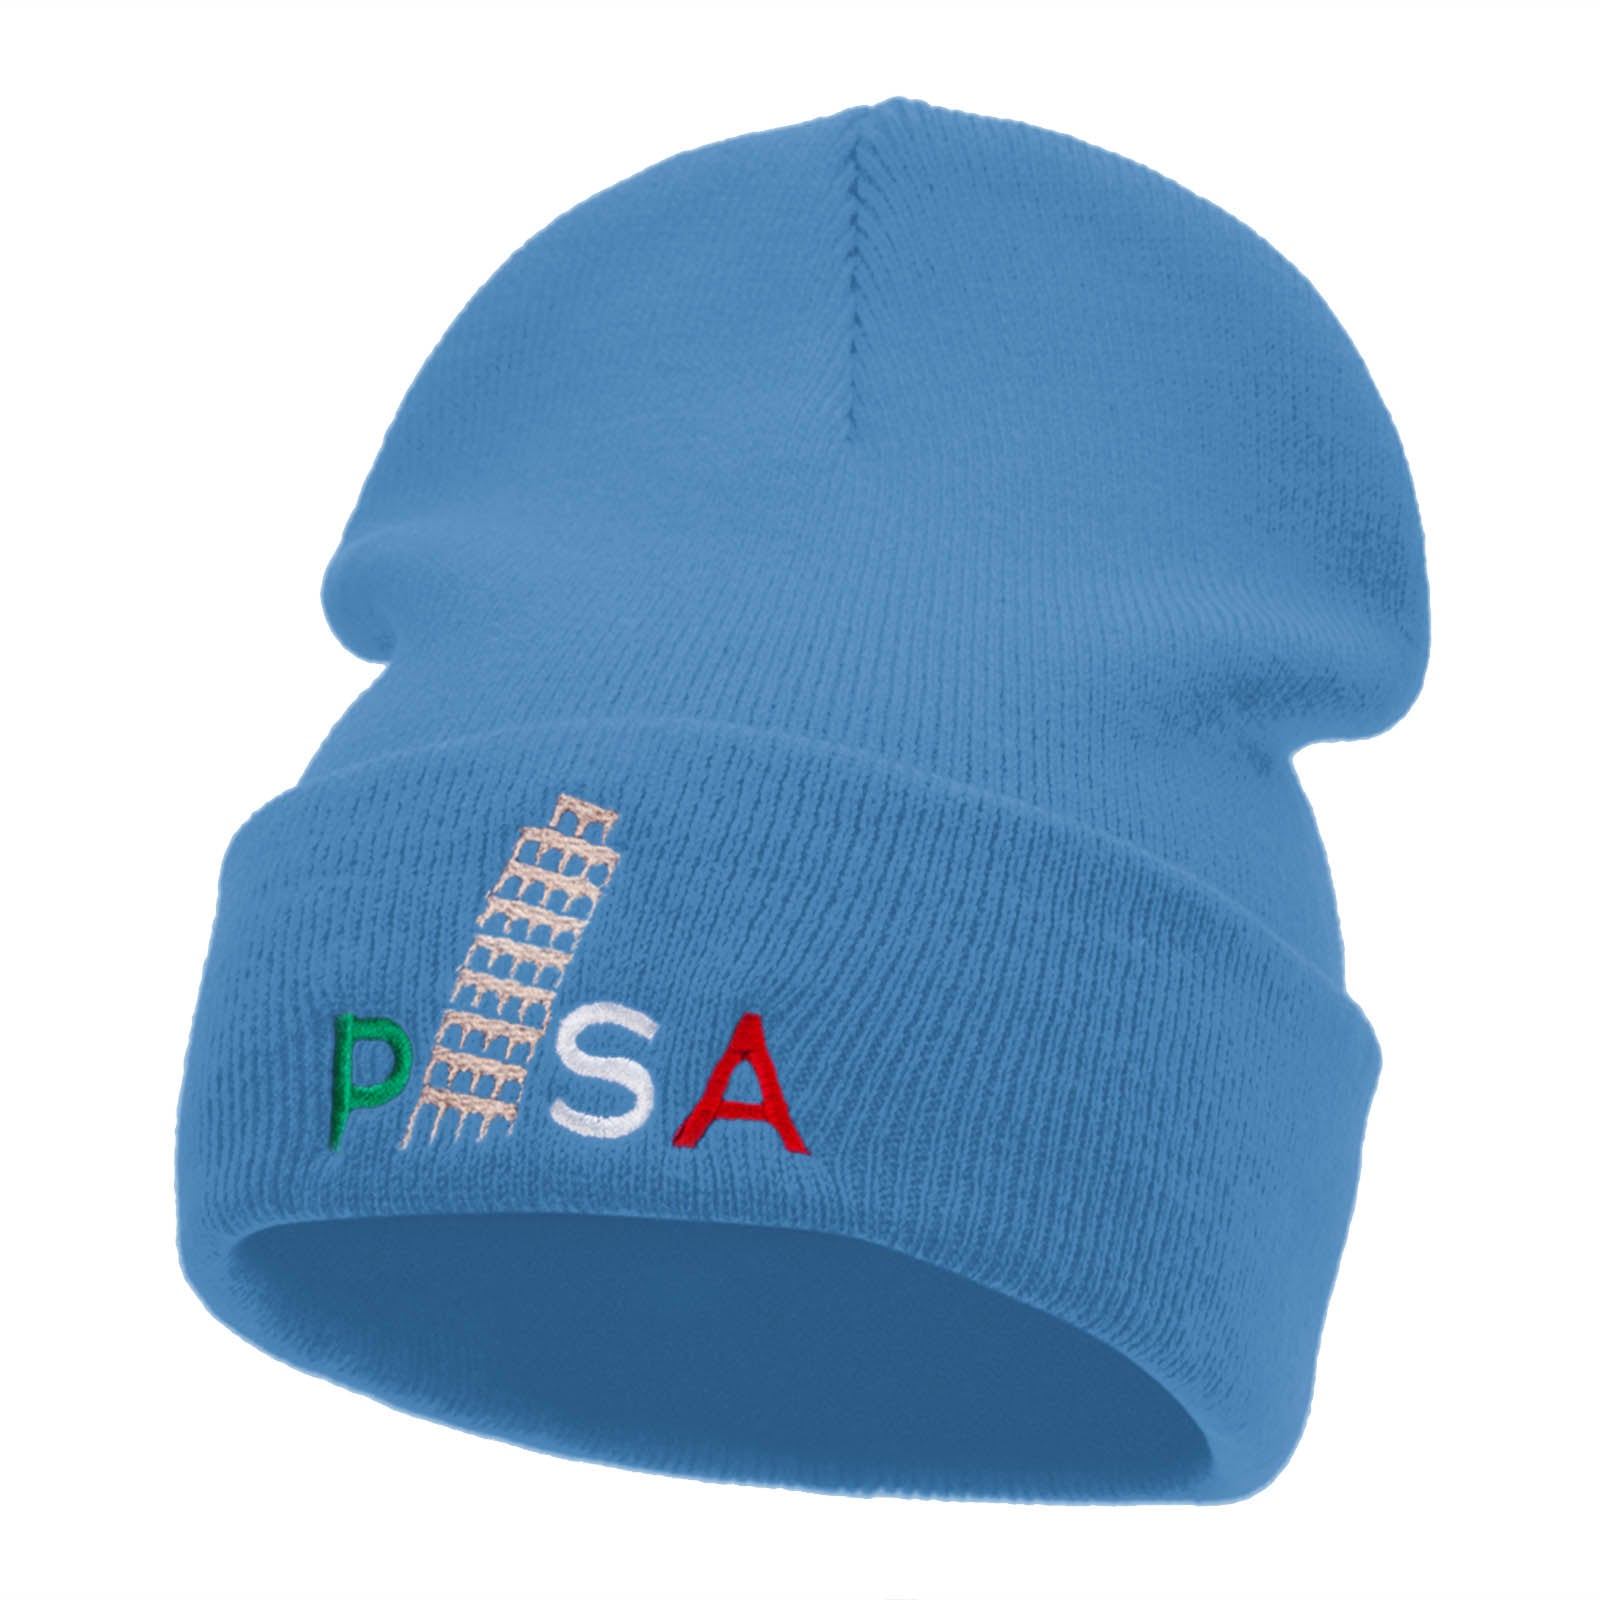 Pisa Embroidered 12 Inch Long Knitted Beanie - Sky Blue OSFM